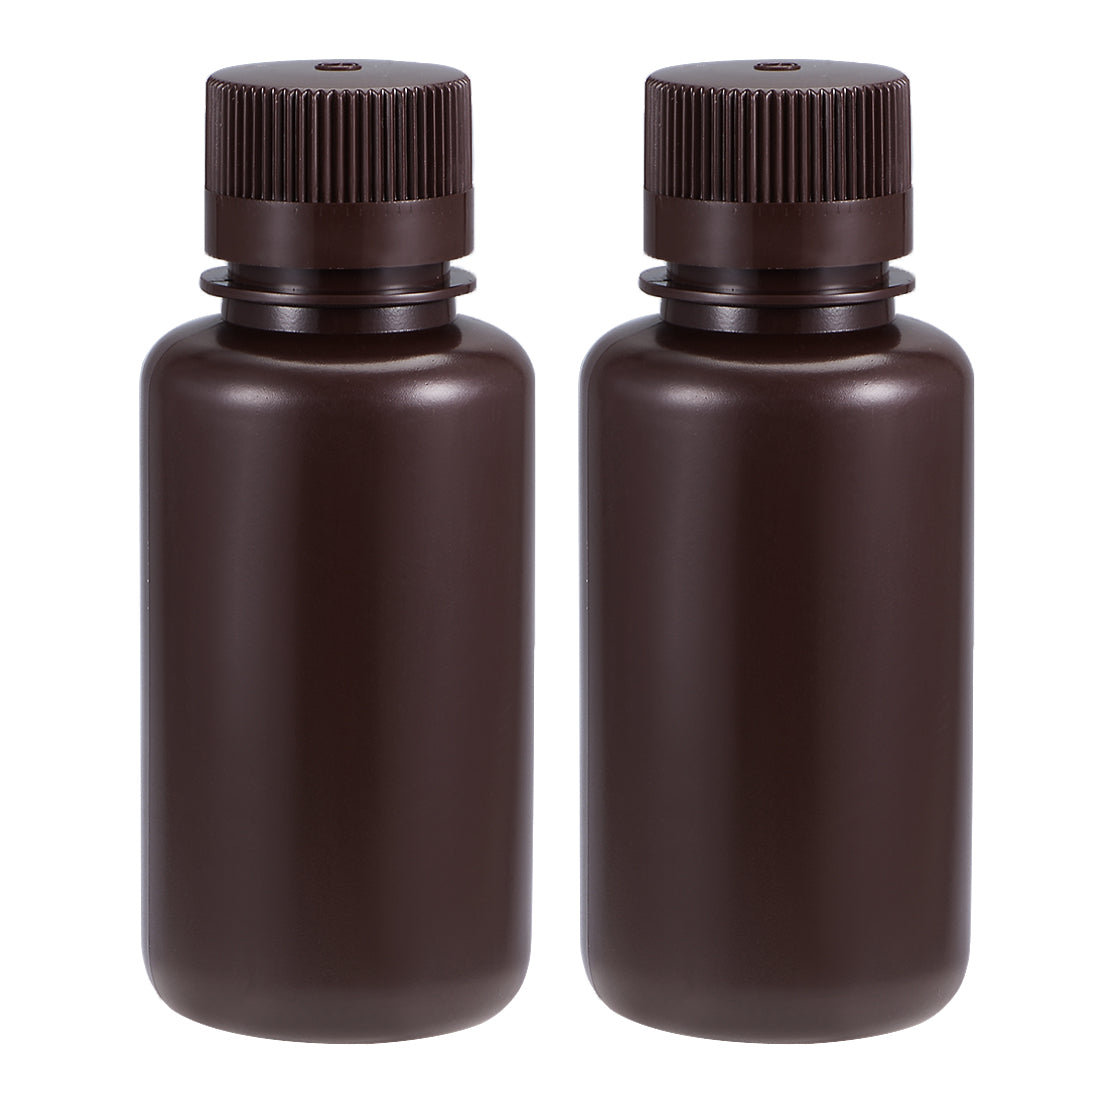 uxcell Uxcell Plastic Lab Chemical Reagent Bottle 250ml/8.5oz Small Mouth Sample Sealing Liquid Storage Container Brown 2pcs